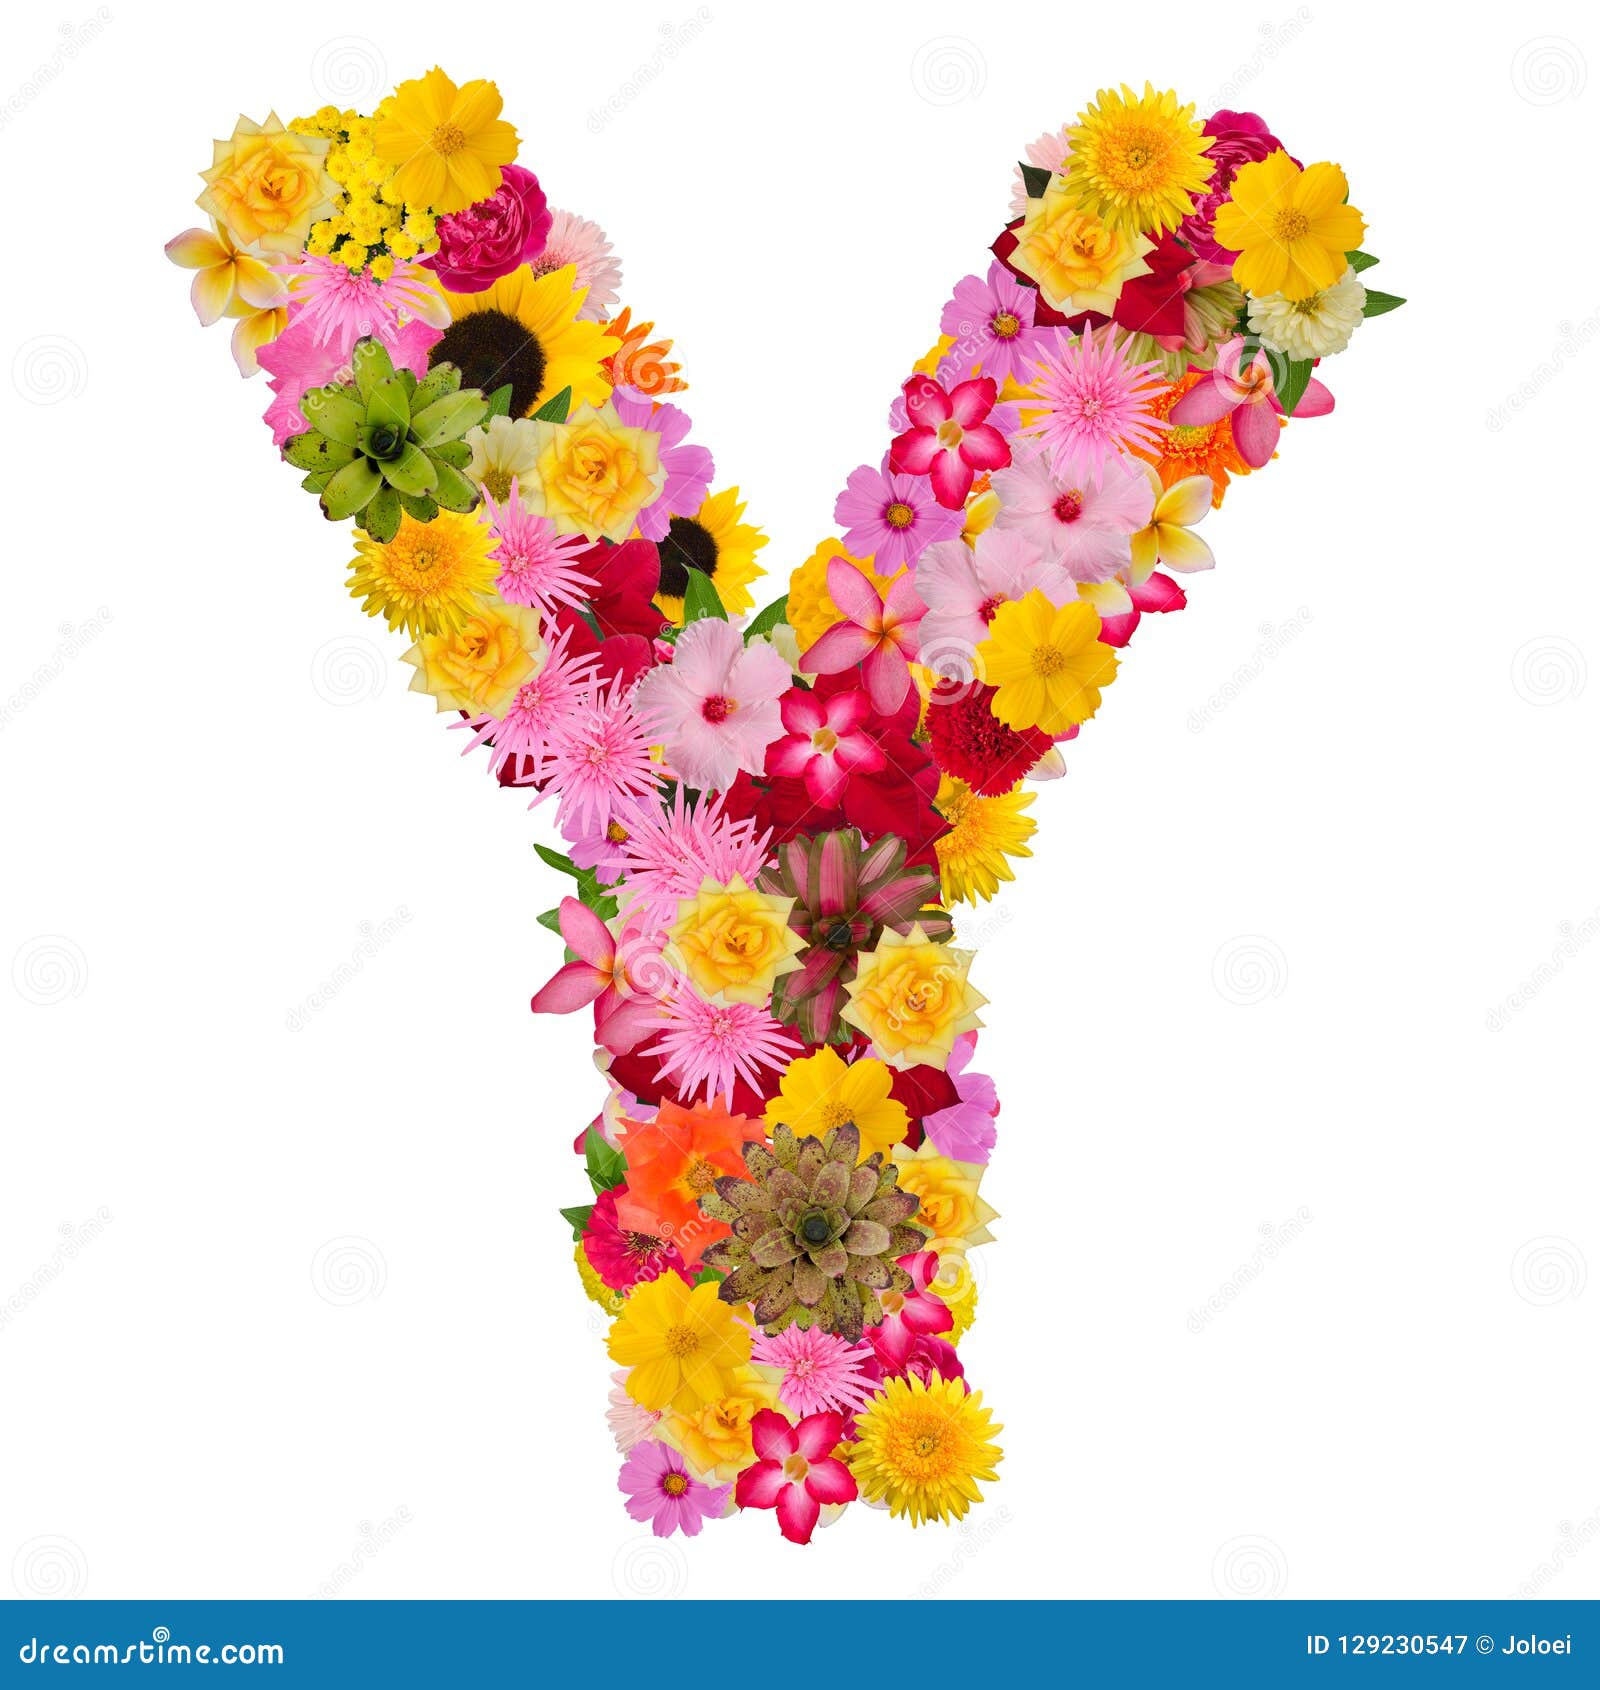 Albums 96+ Images flowers that start with the letter y Latest